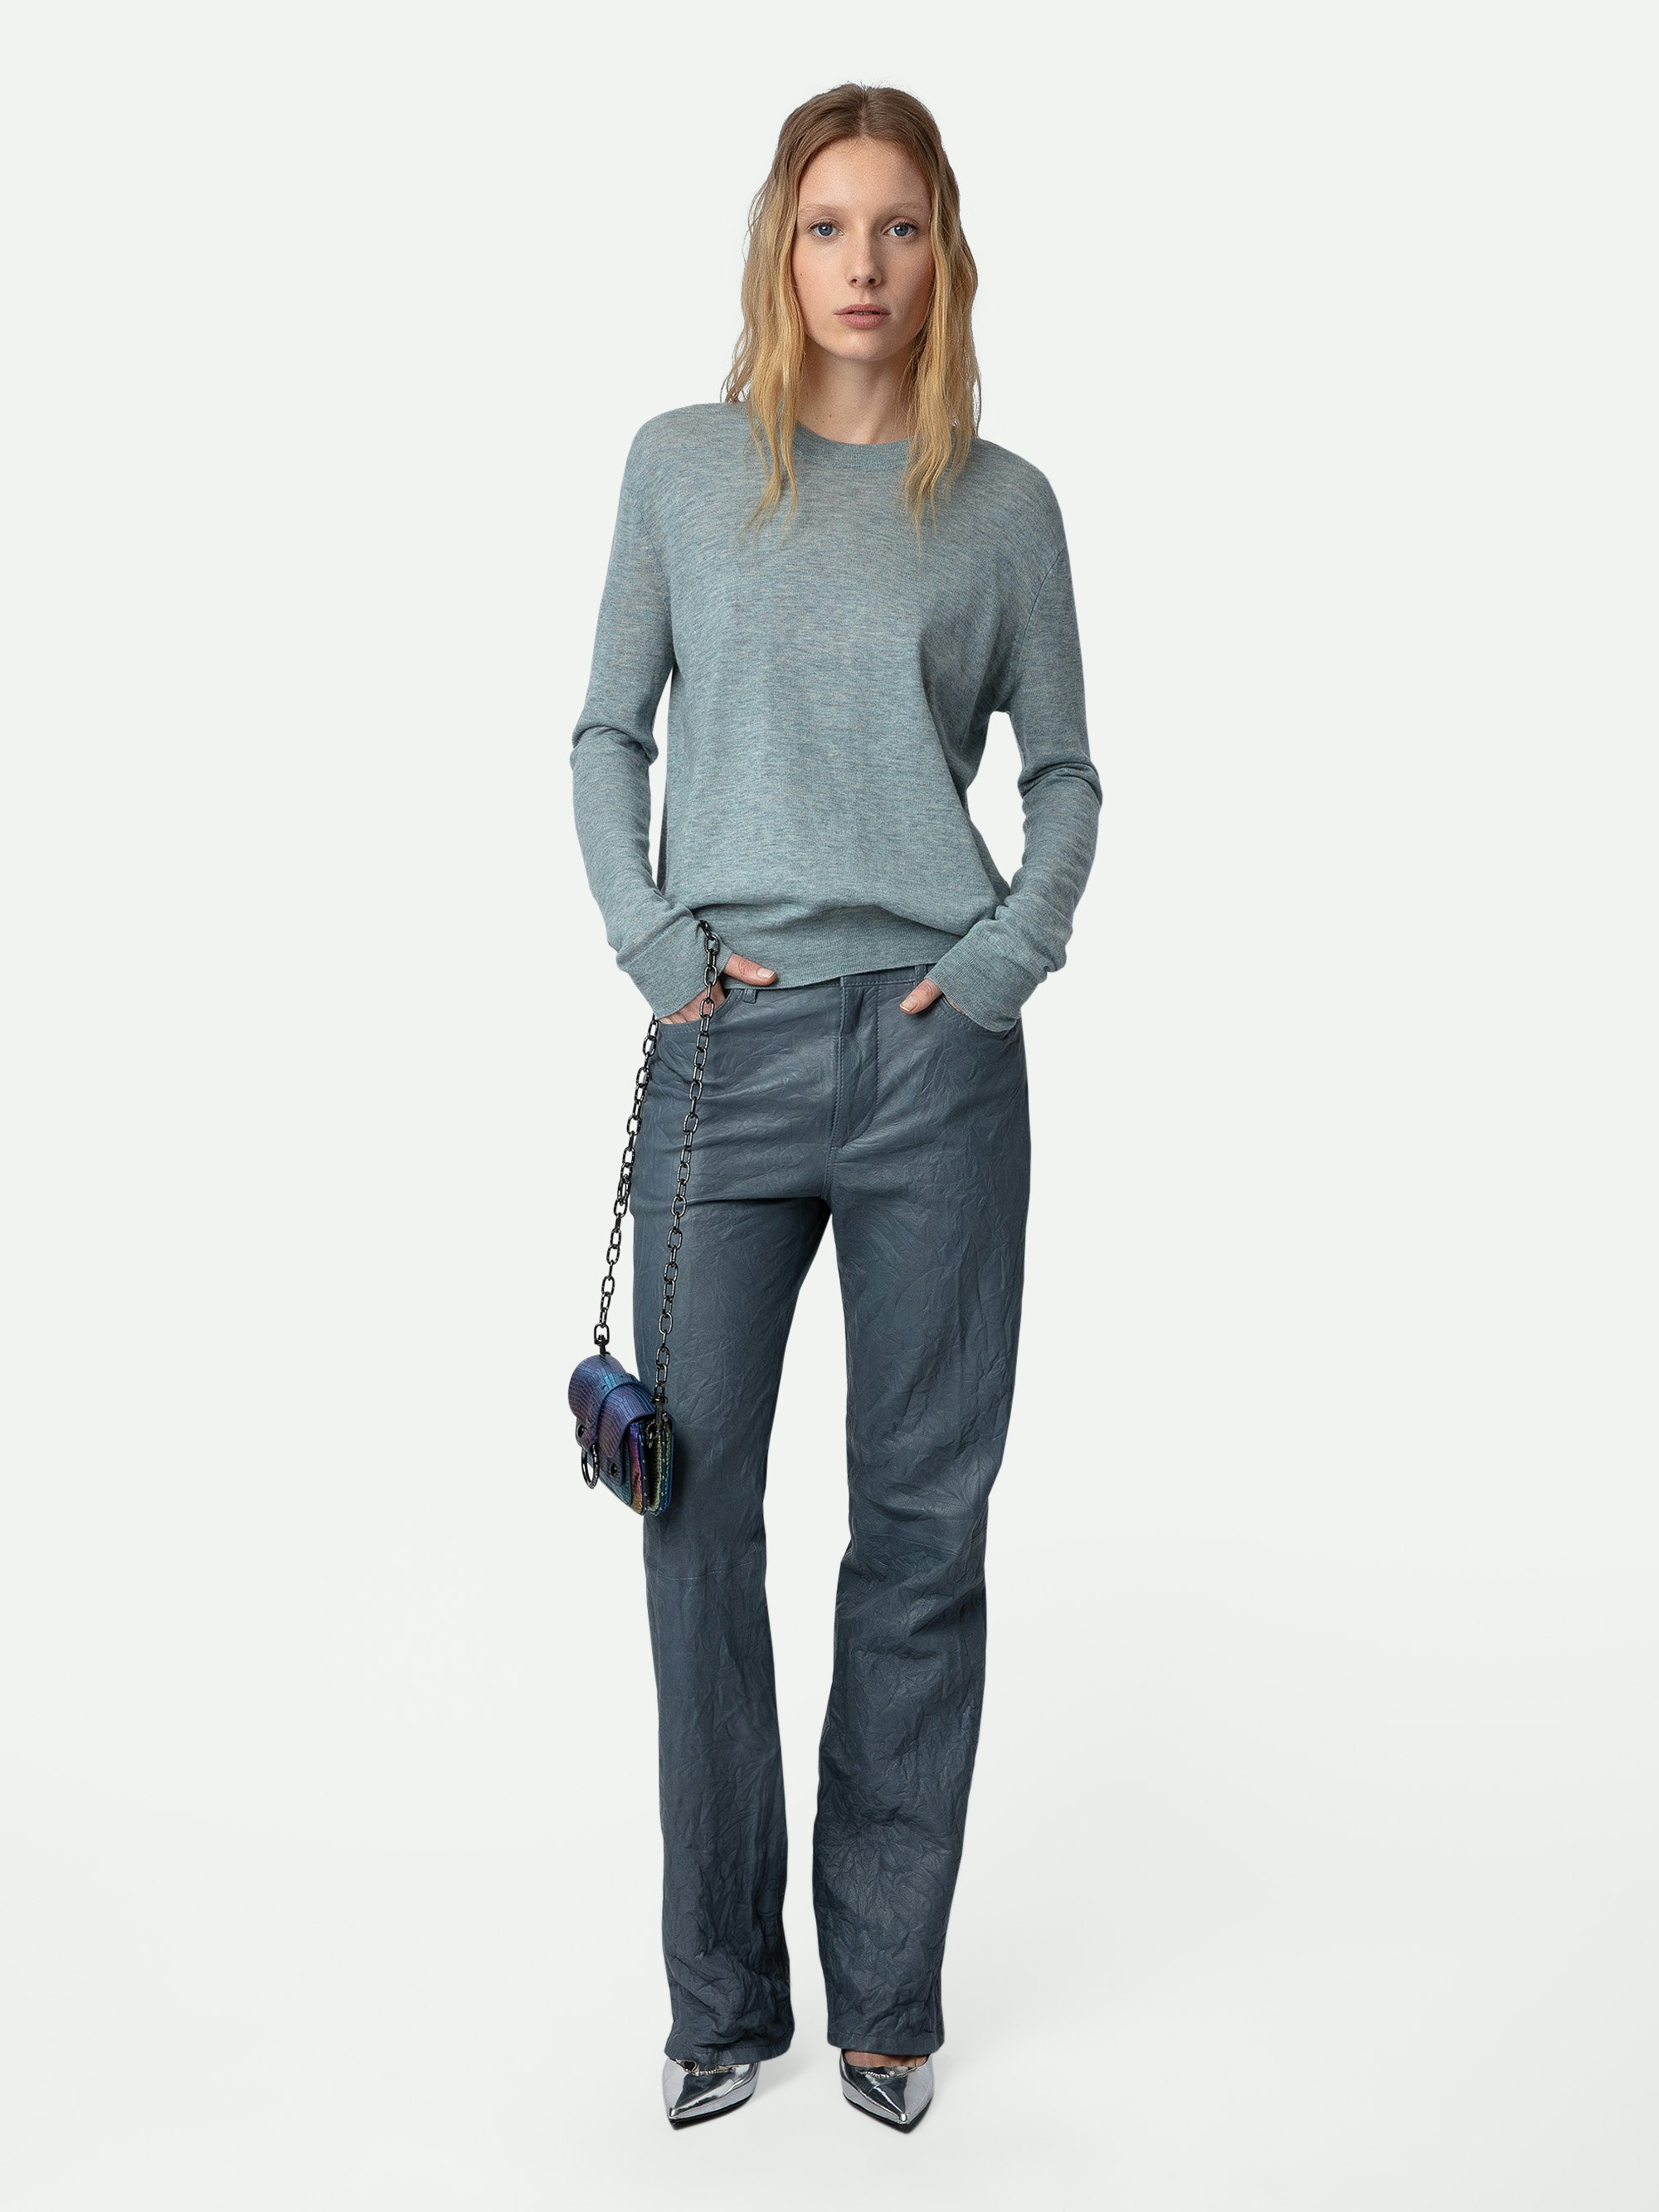 Life Jumper 100% Cashmere - Blue 100% cashmere long-sleeved jumper with openwork wings on the back.